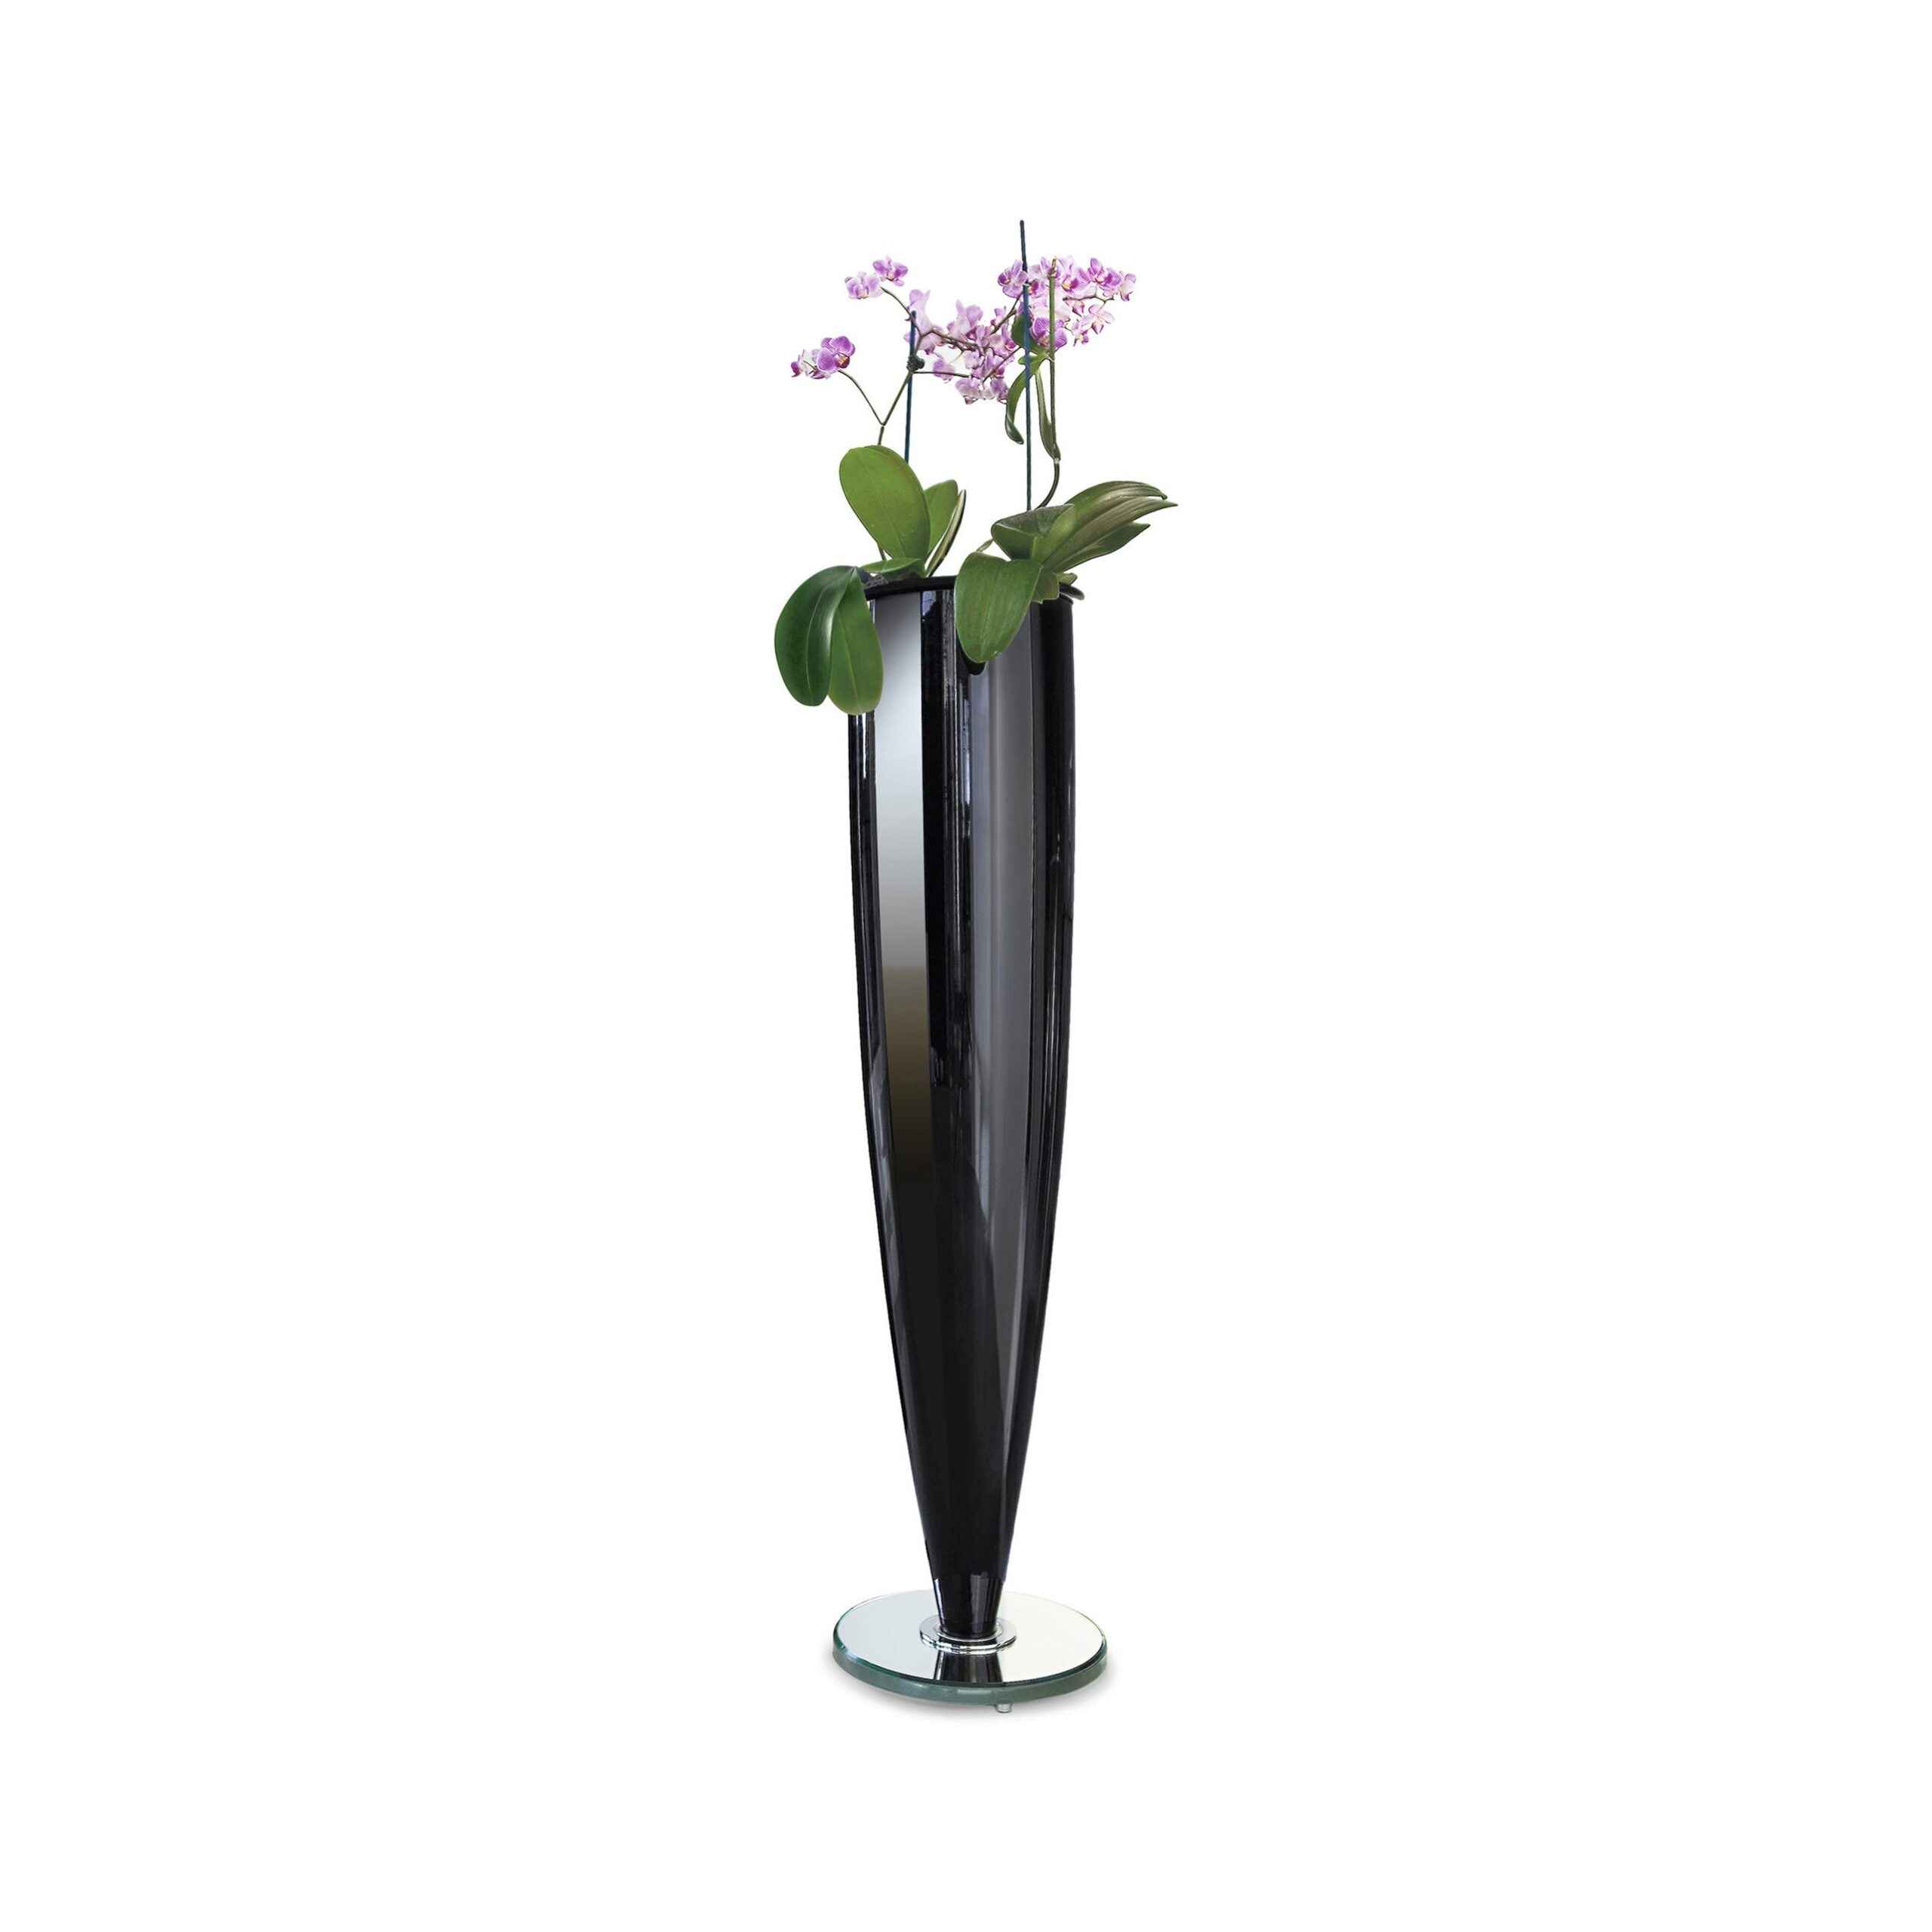 luxury furniture stores calgary glassware and leisure ming vase reflex angelo luxuries of europe